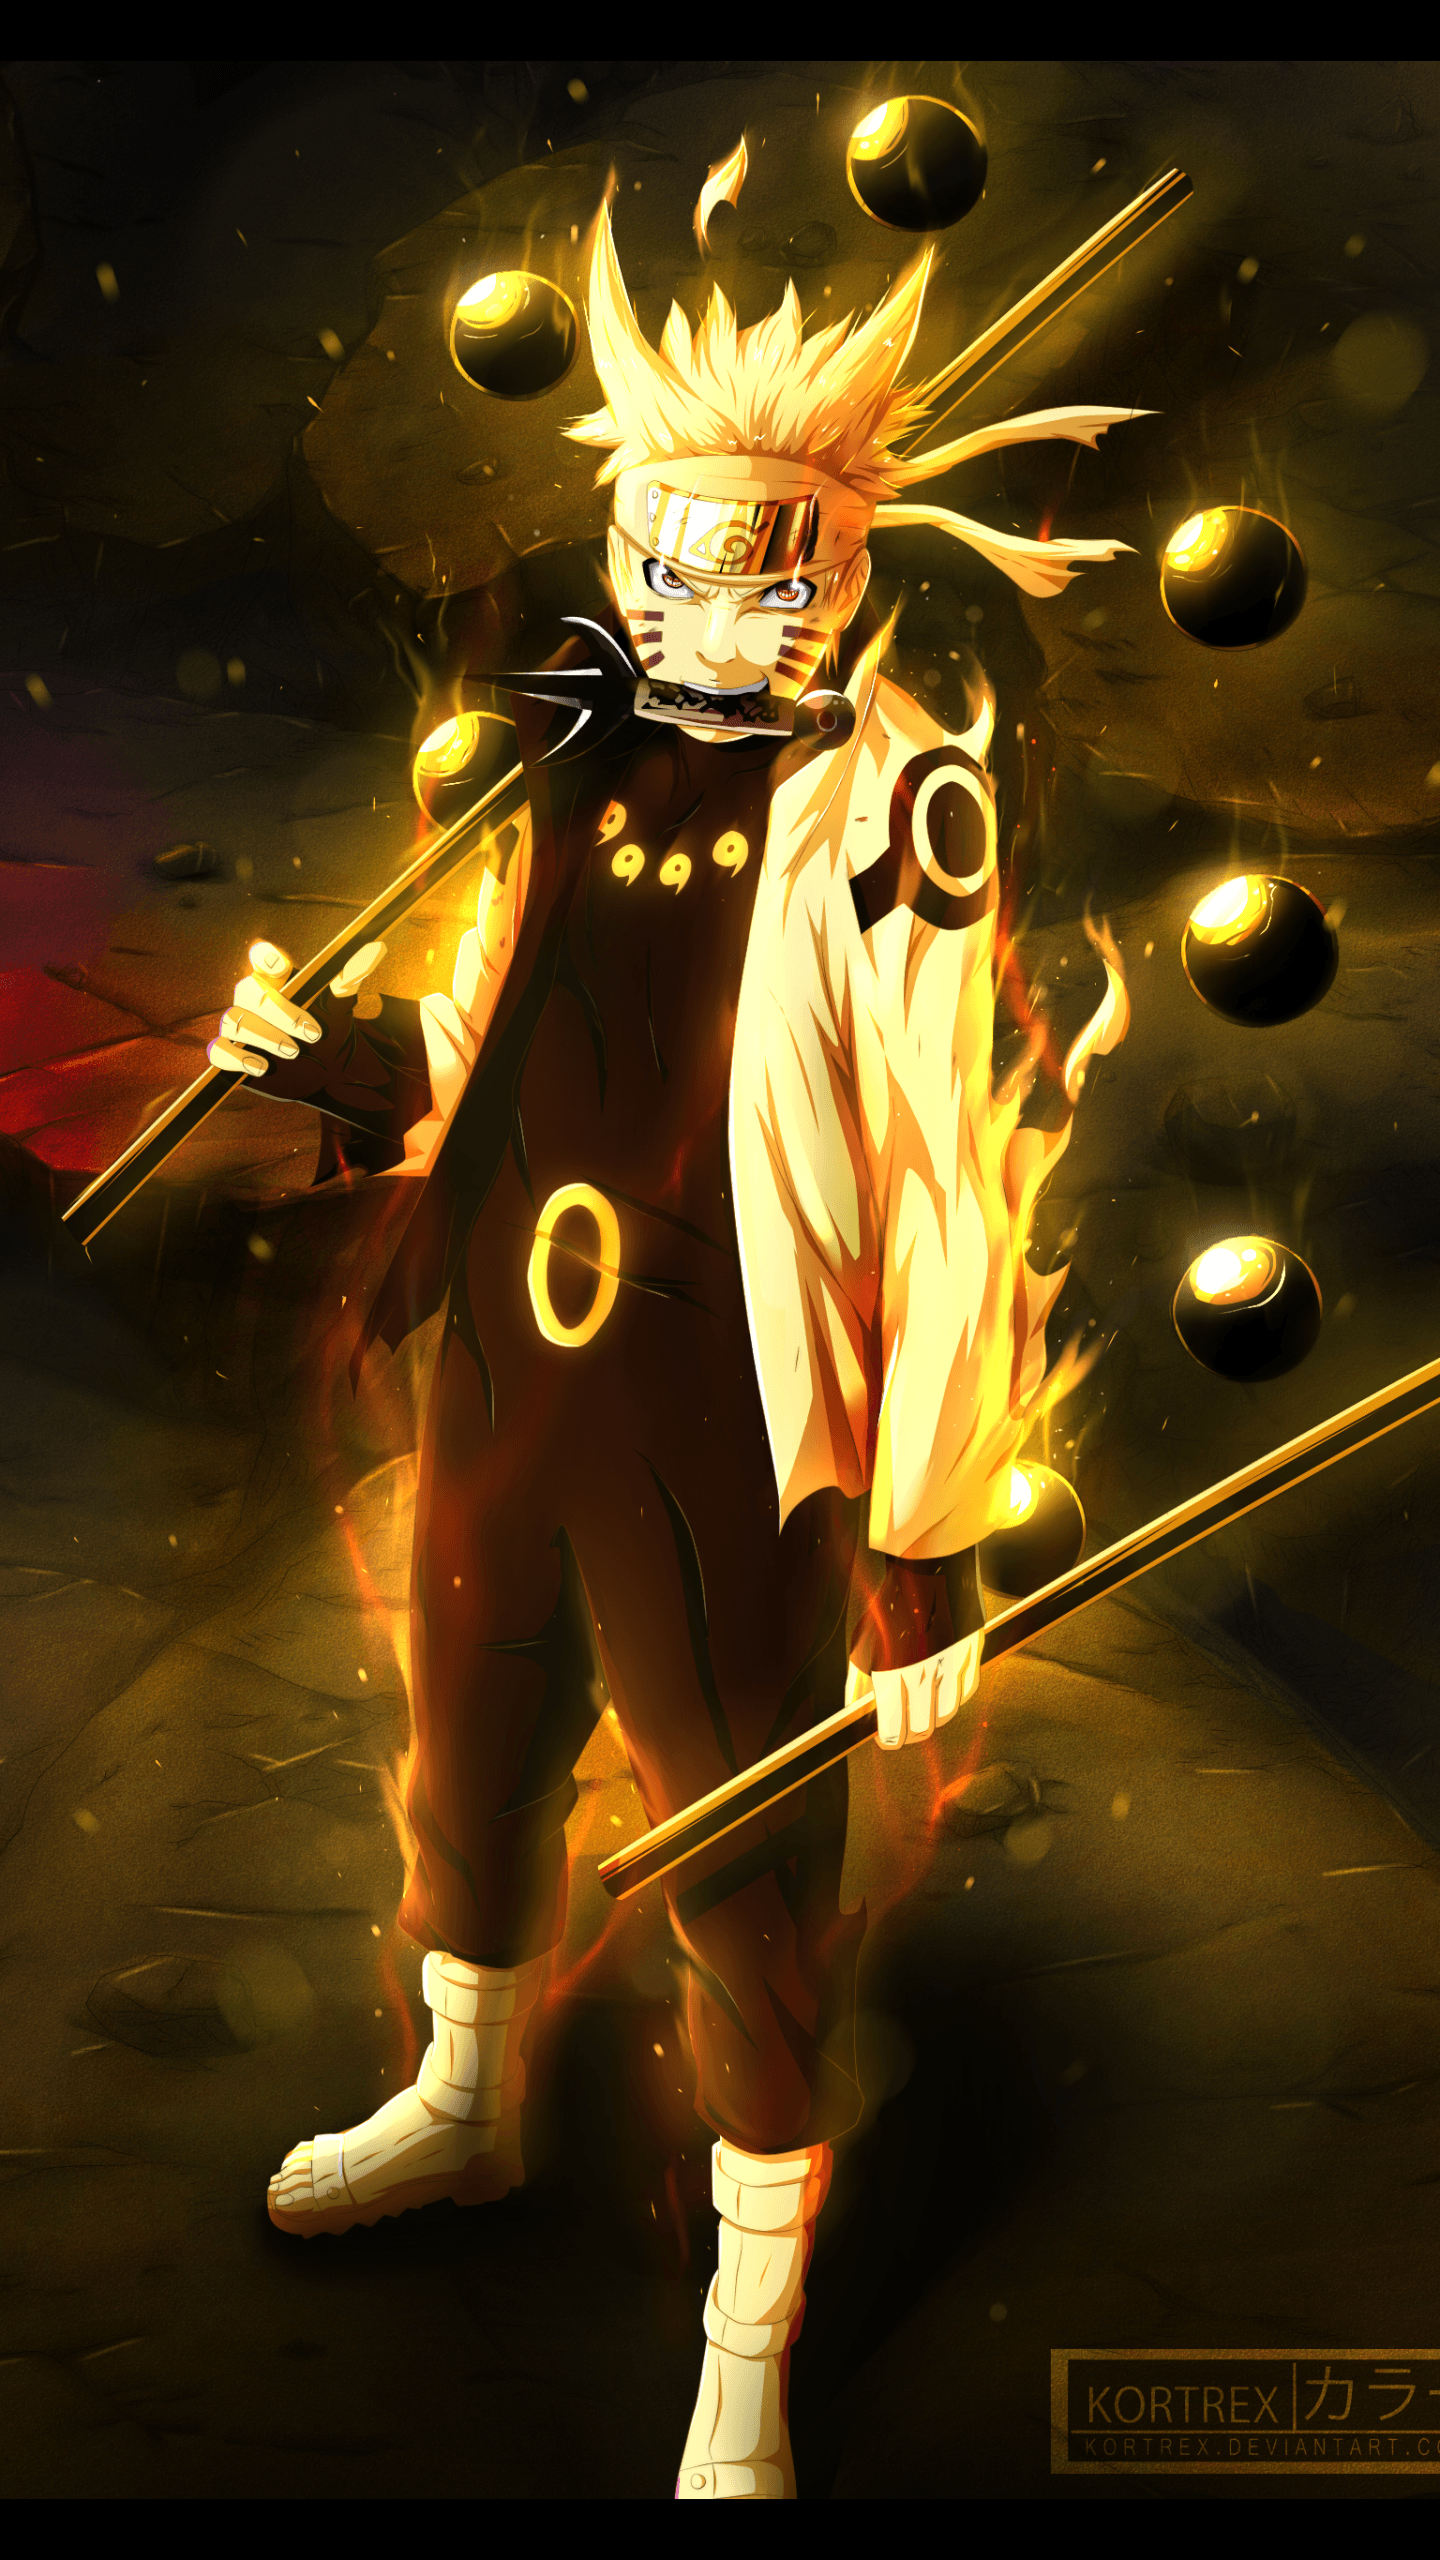 Wallpapers Naruto Png For Android - Wallpaper Cave